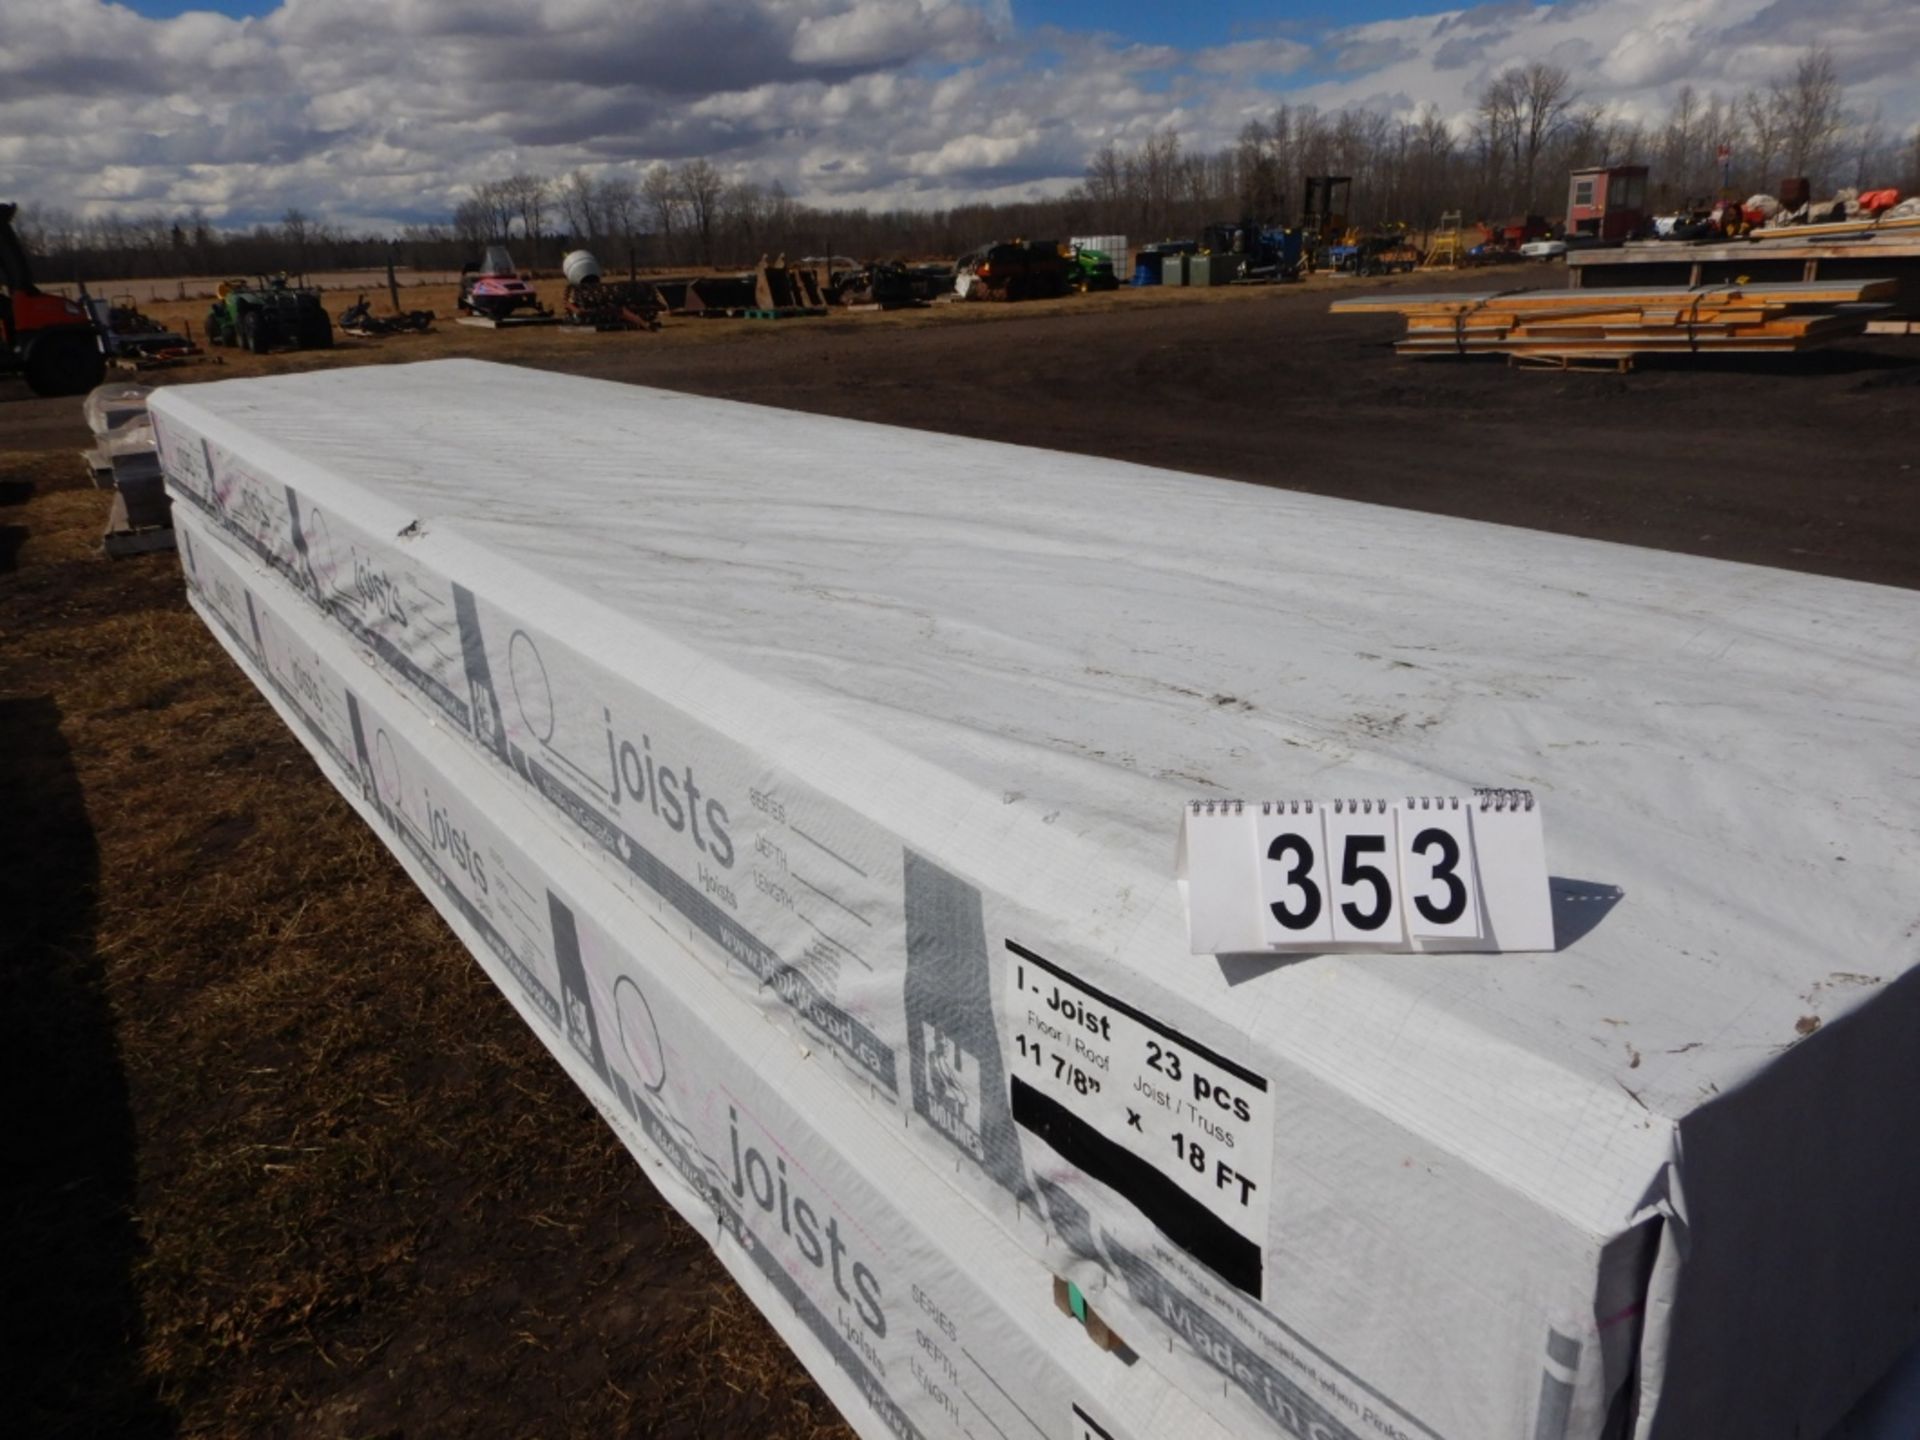 L/O 23-I-JOIST 11-7/8IN X 18FT FOR FLOOR OR ROOF